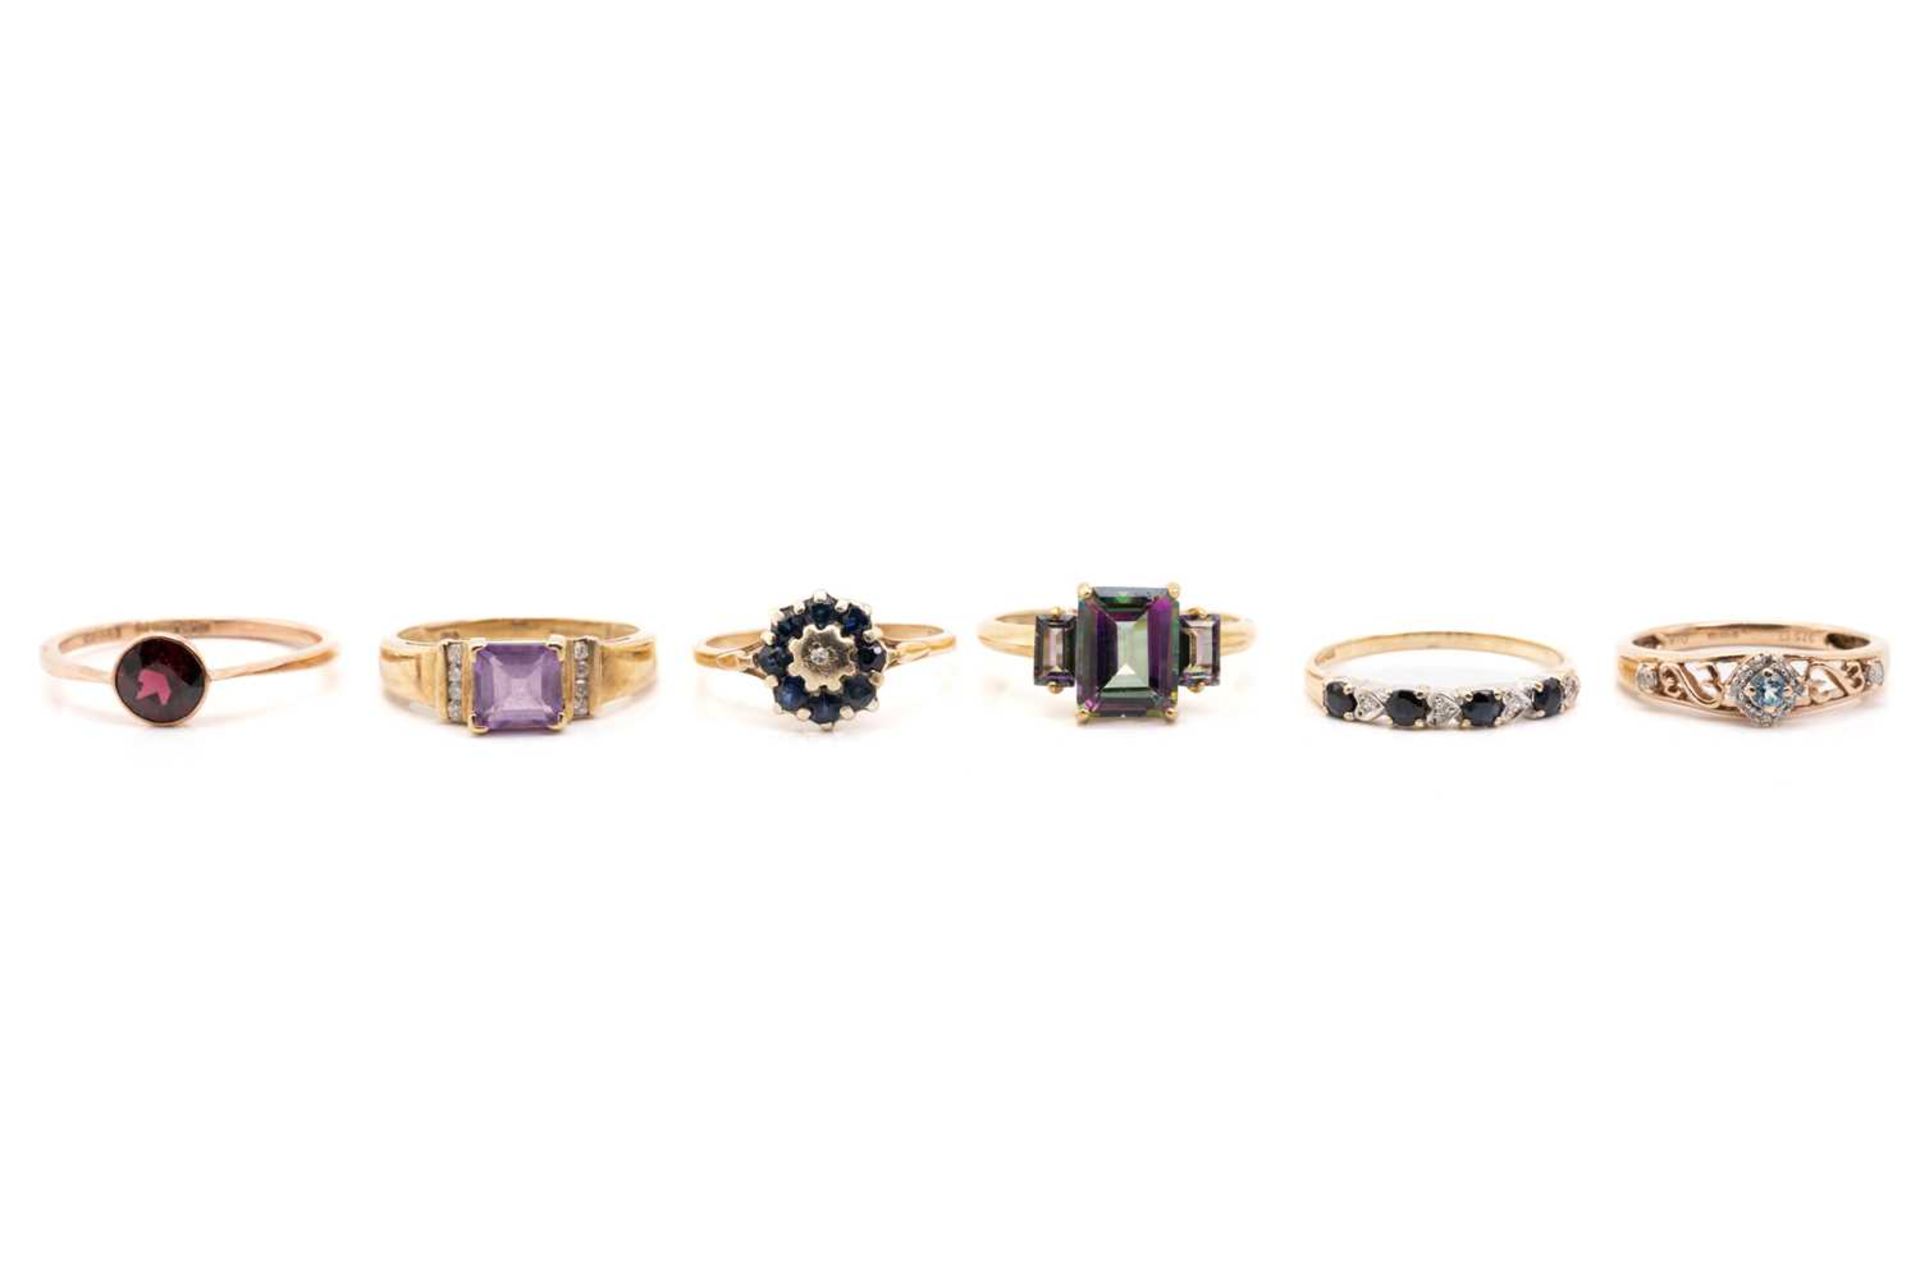 A 9ct yellow gold and amethyst dress ring, size M 1/2, together with a 9ct yellow gold and '